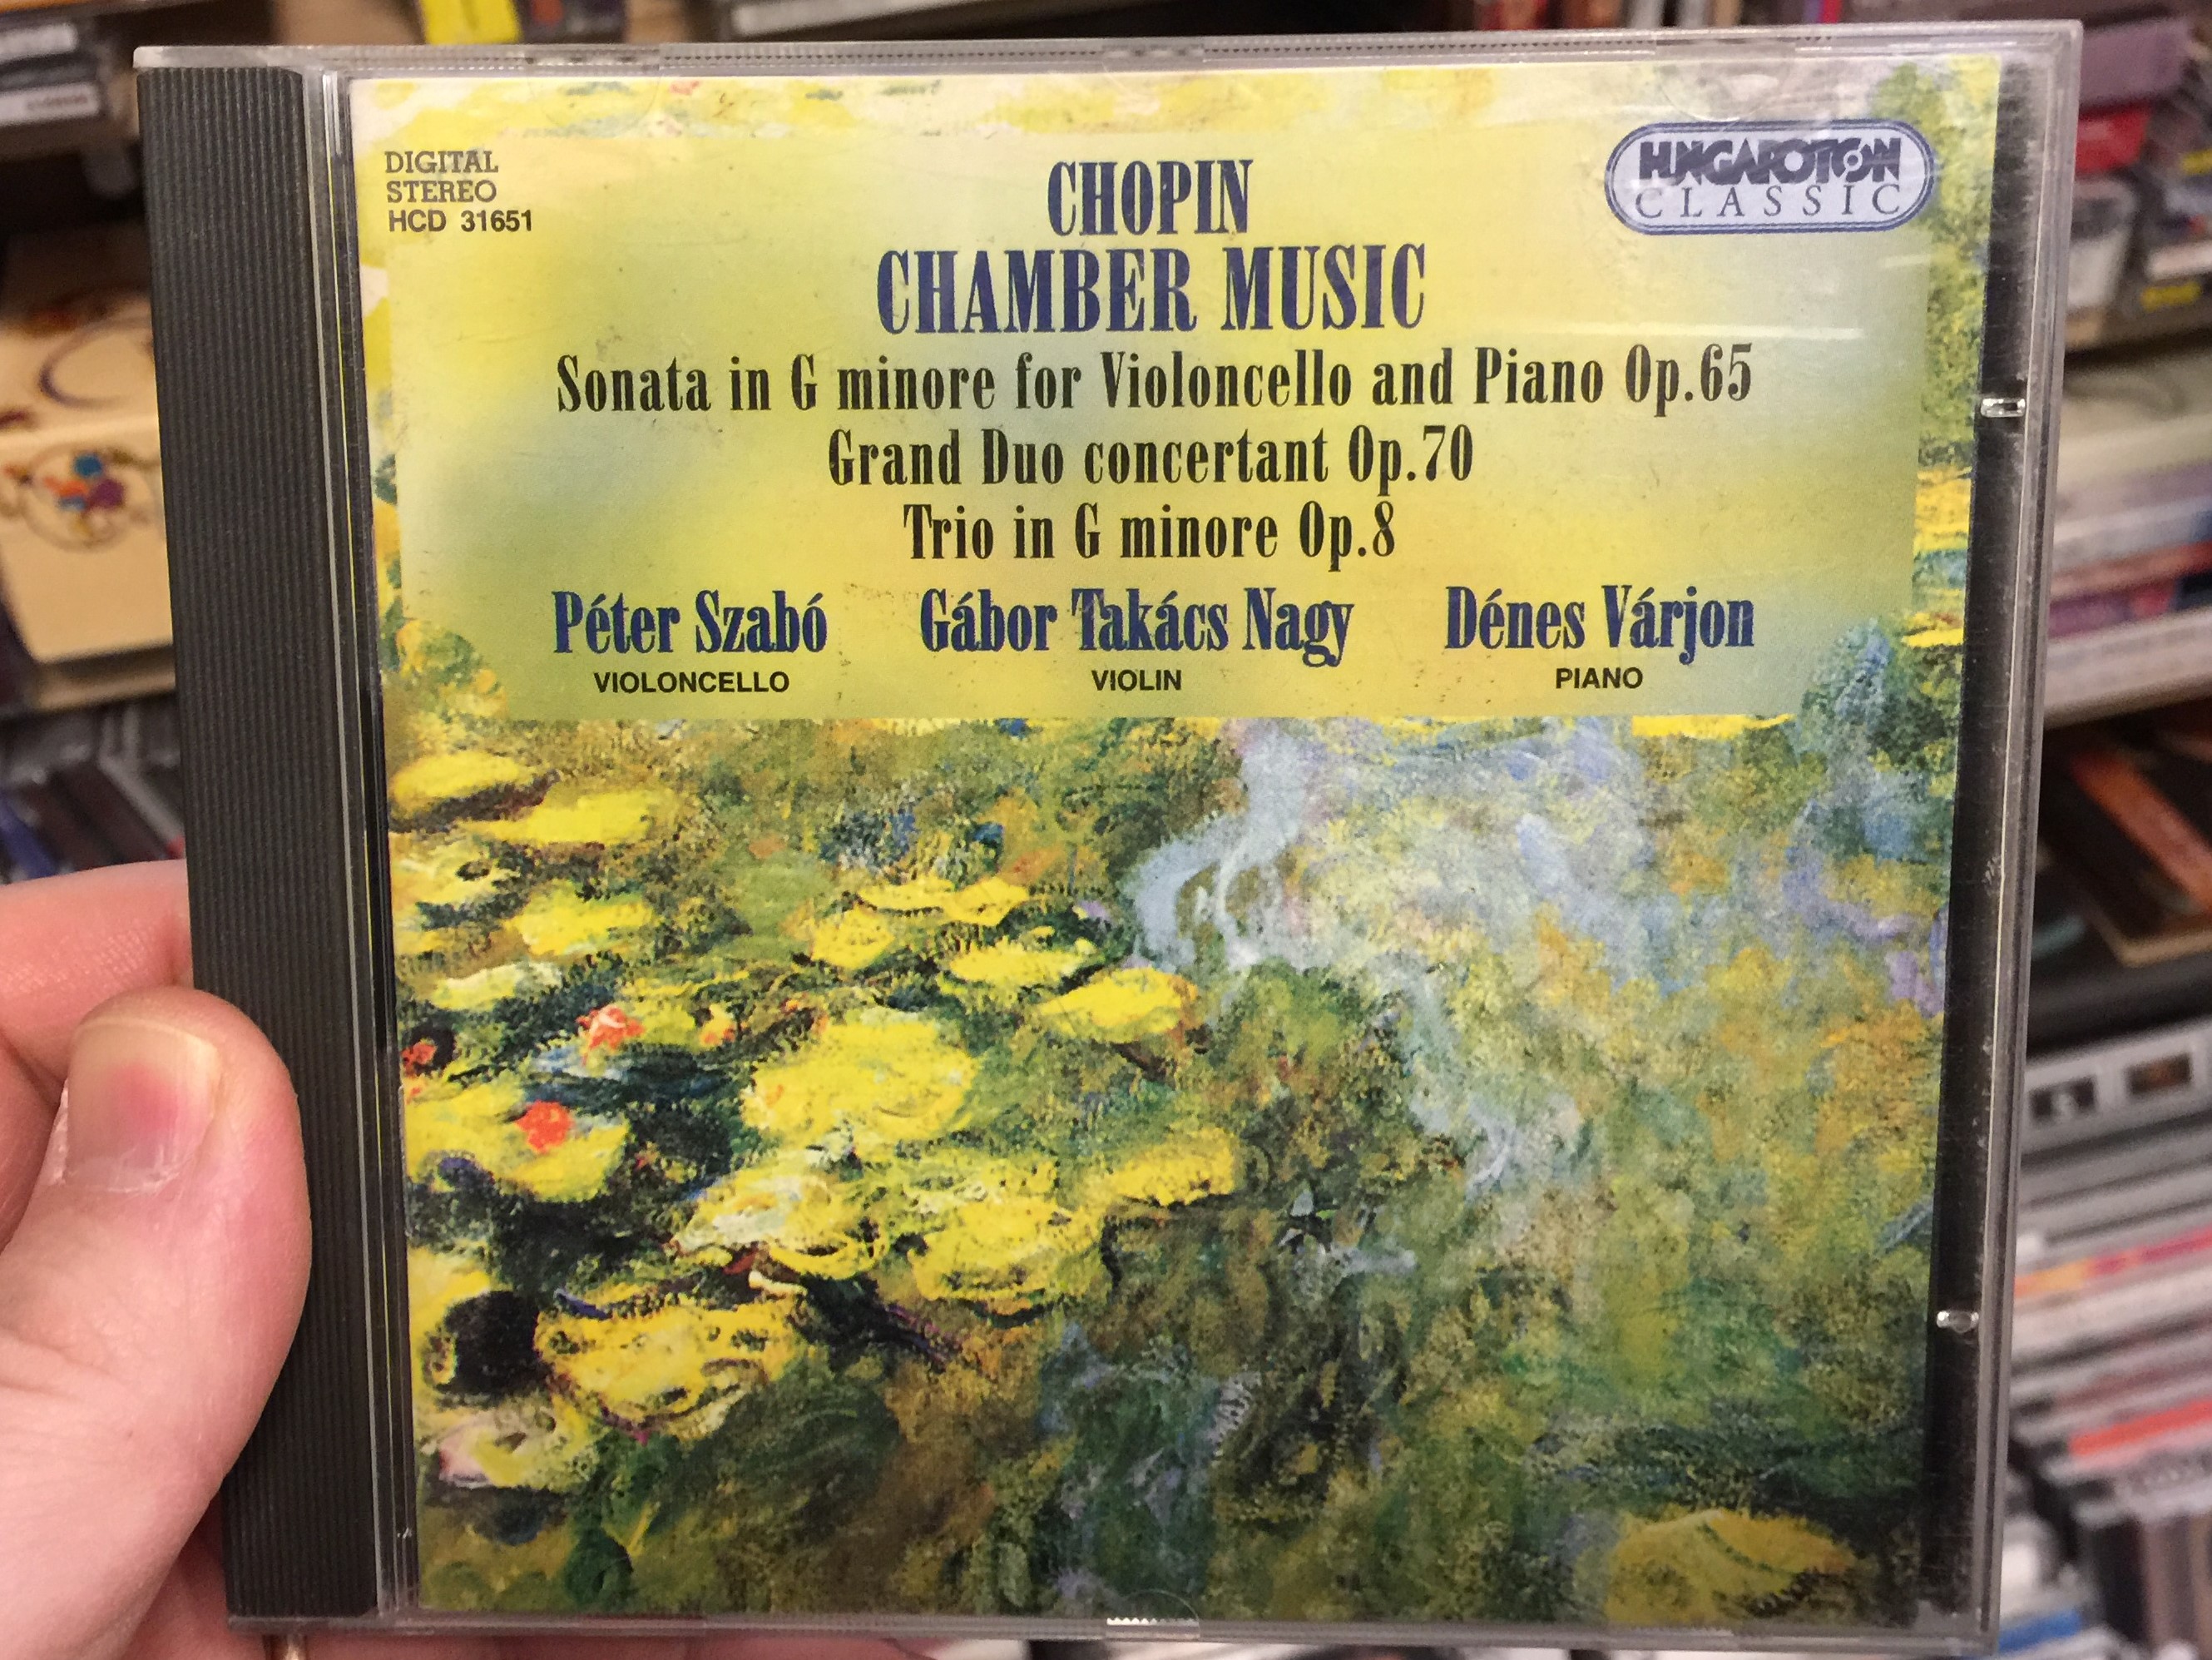 chopin-chamber-music-sonata-in-g-minore-for-violoncello-and-piano-op.-65-grand-duo-concertant-op.-70-trio-in-g-minore-op.-8-peter-szabo-gabor-takacs-nagy-denes-varjon-hungaroton-classic-au-1-.jpg